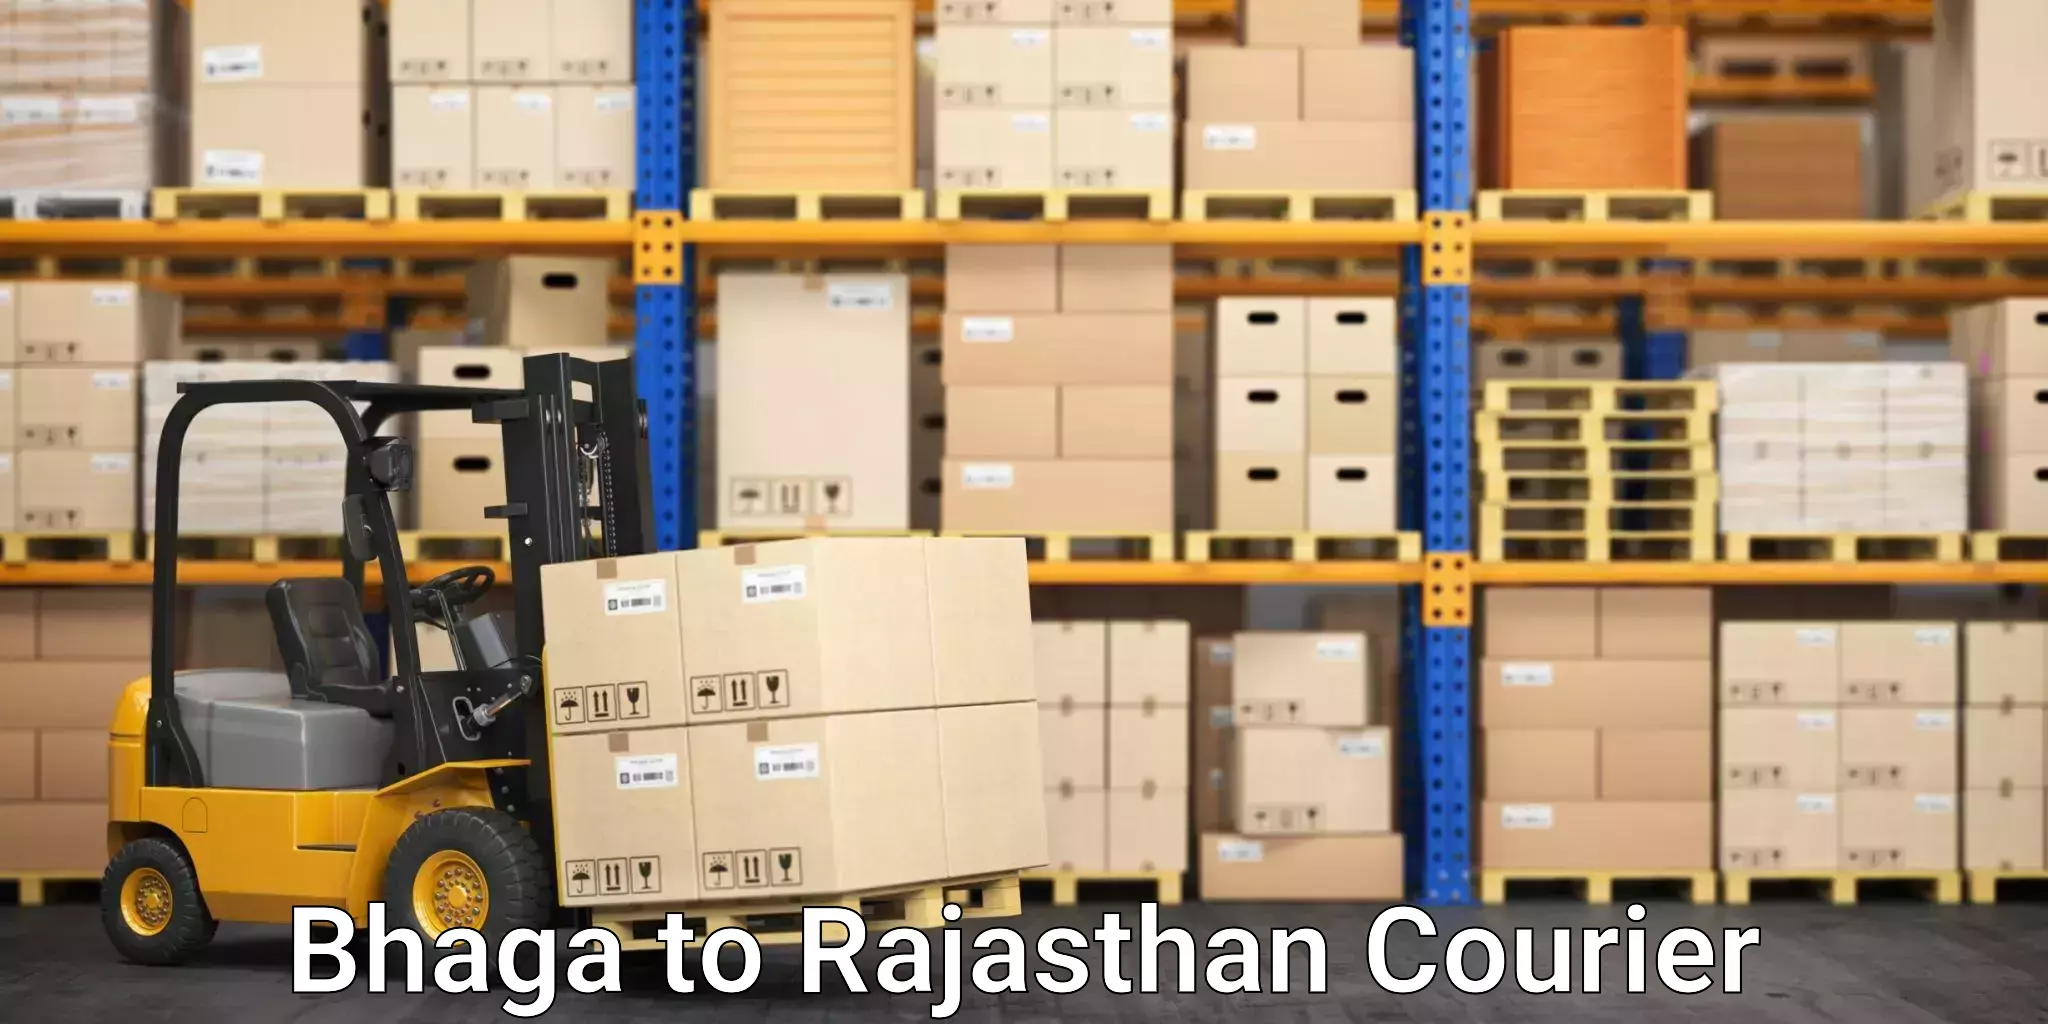 Advanced shipping technology in Bhaga to Rajasthan